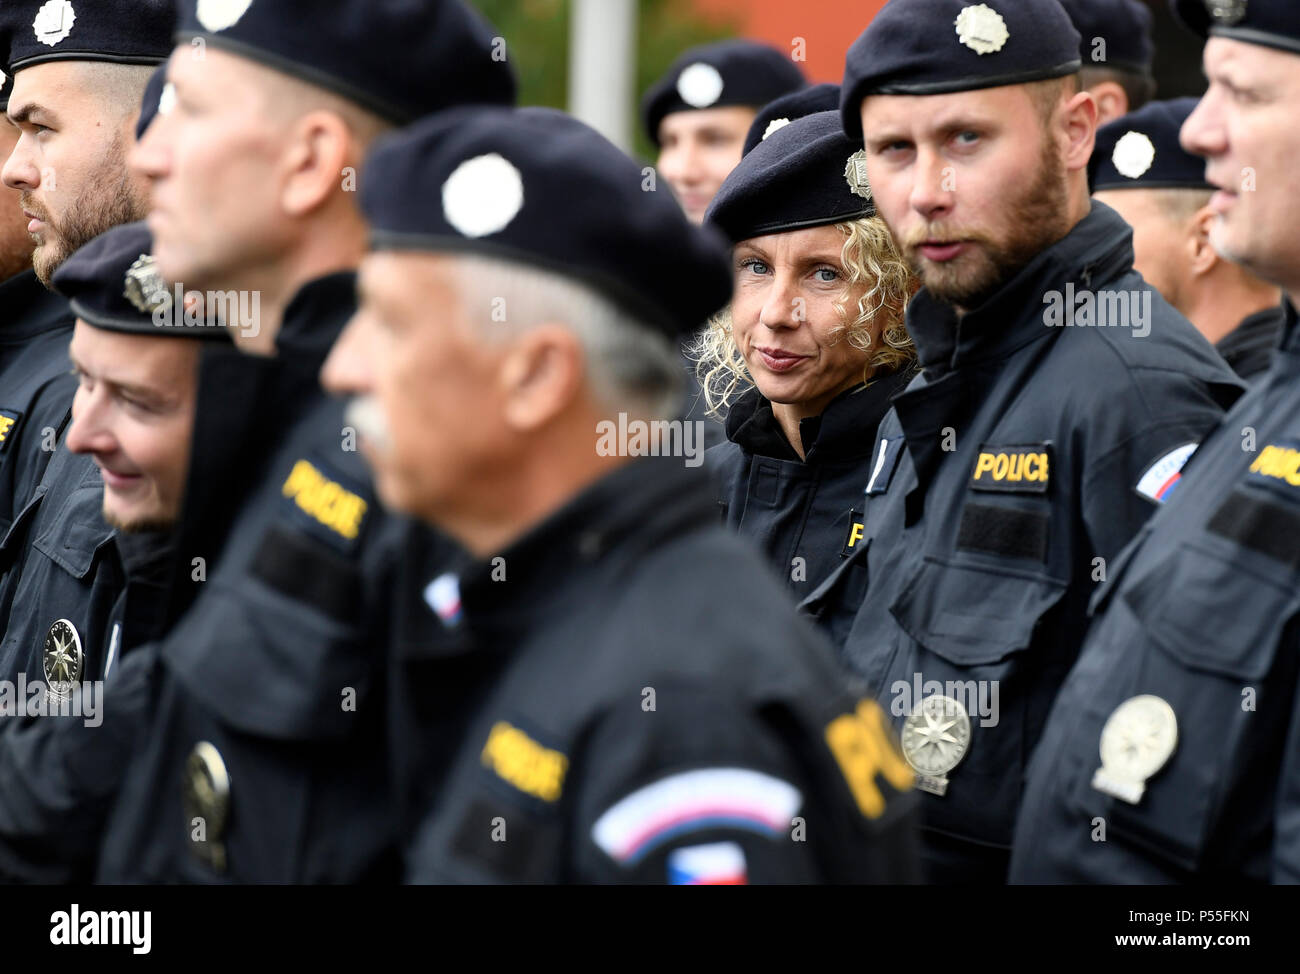 Czech police officers attend a festive departure of Czech police to foreign mission in Macedonia and Serbia, in Prague, Czech Republic, on June 25, 2018. (CTK Photo/Michal Krumphanzl) Stock Photo